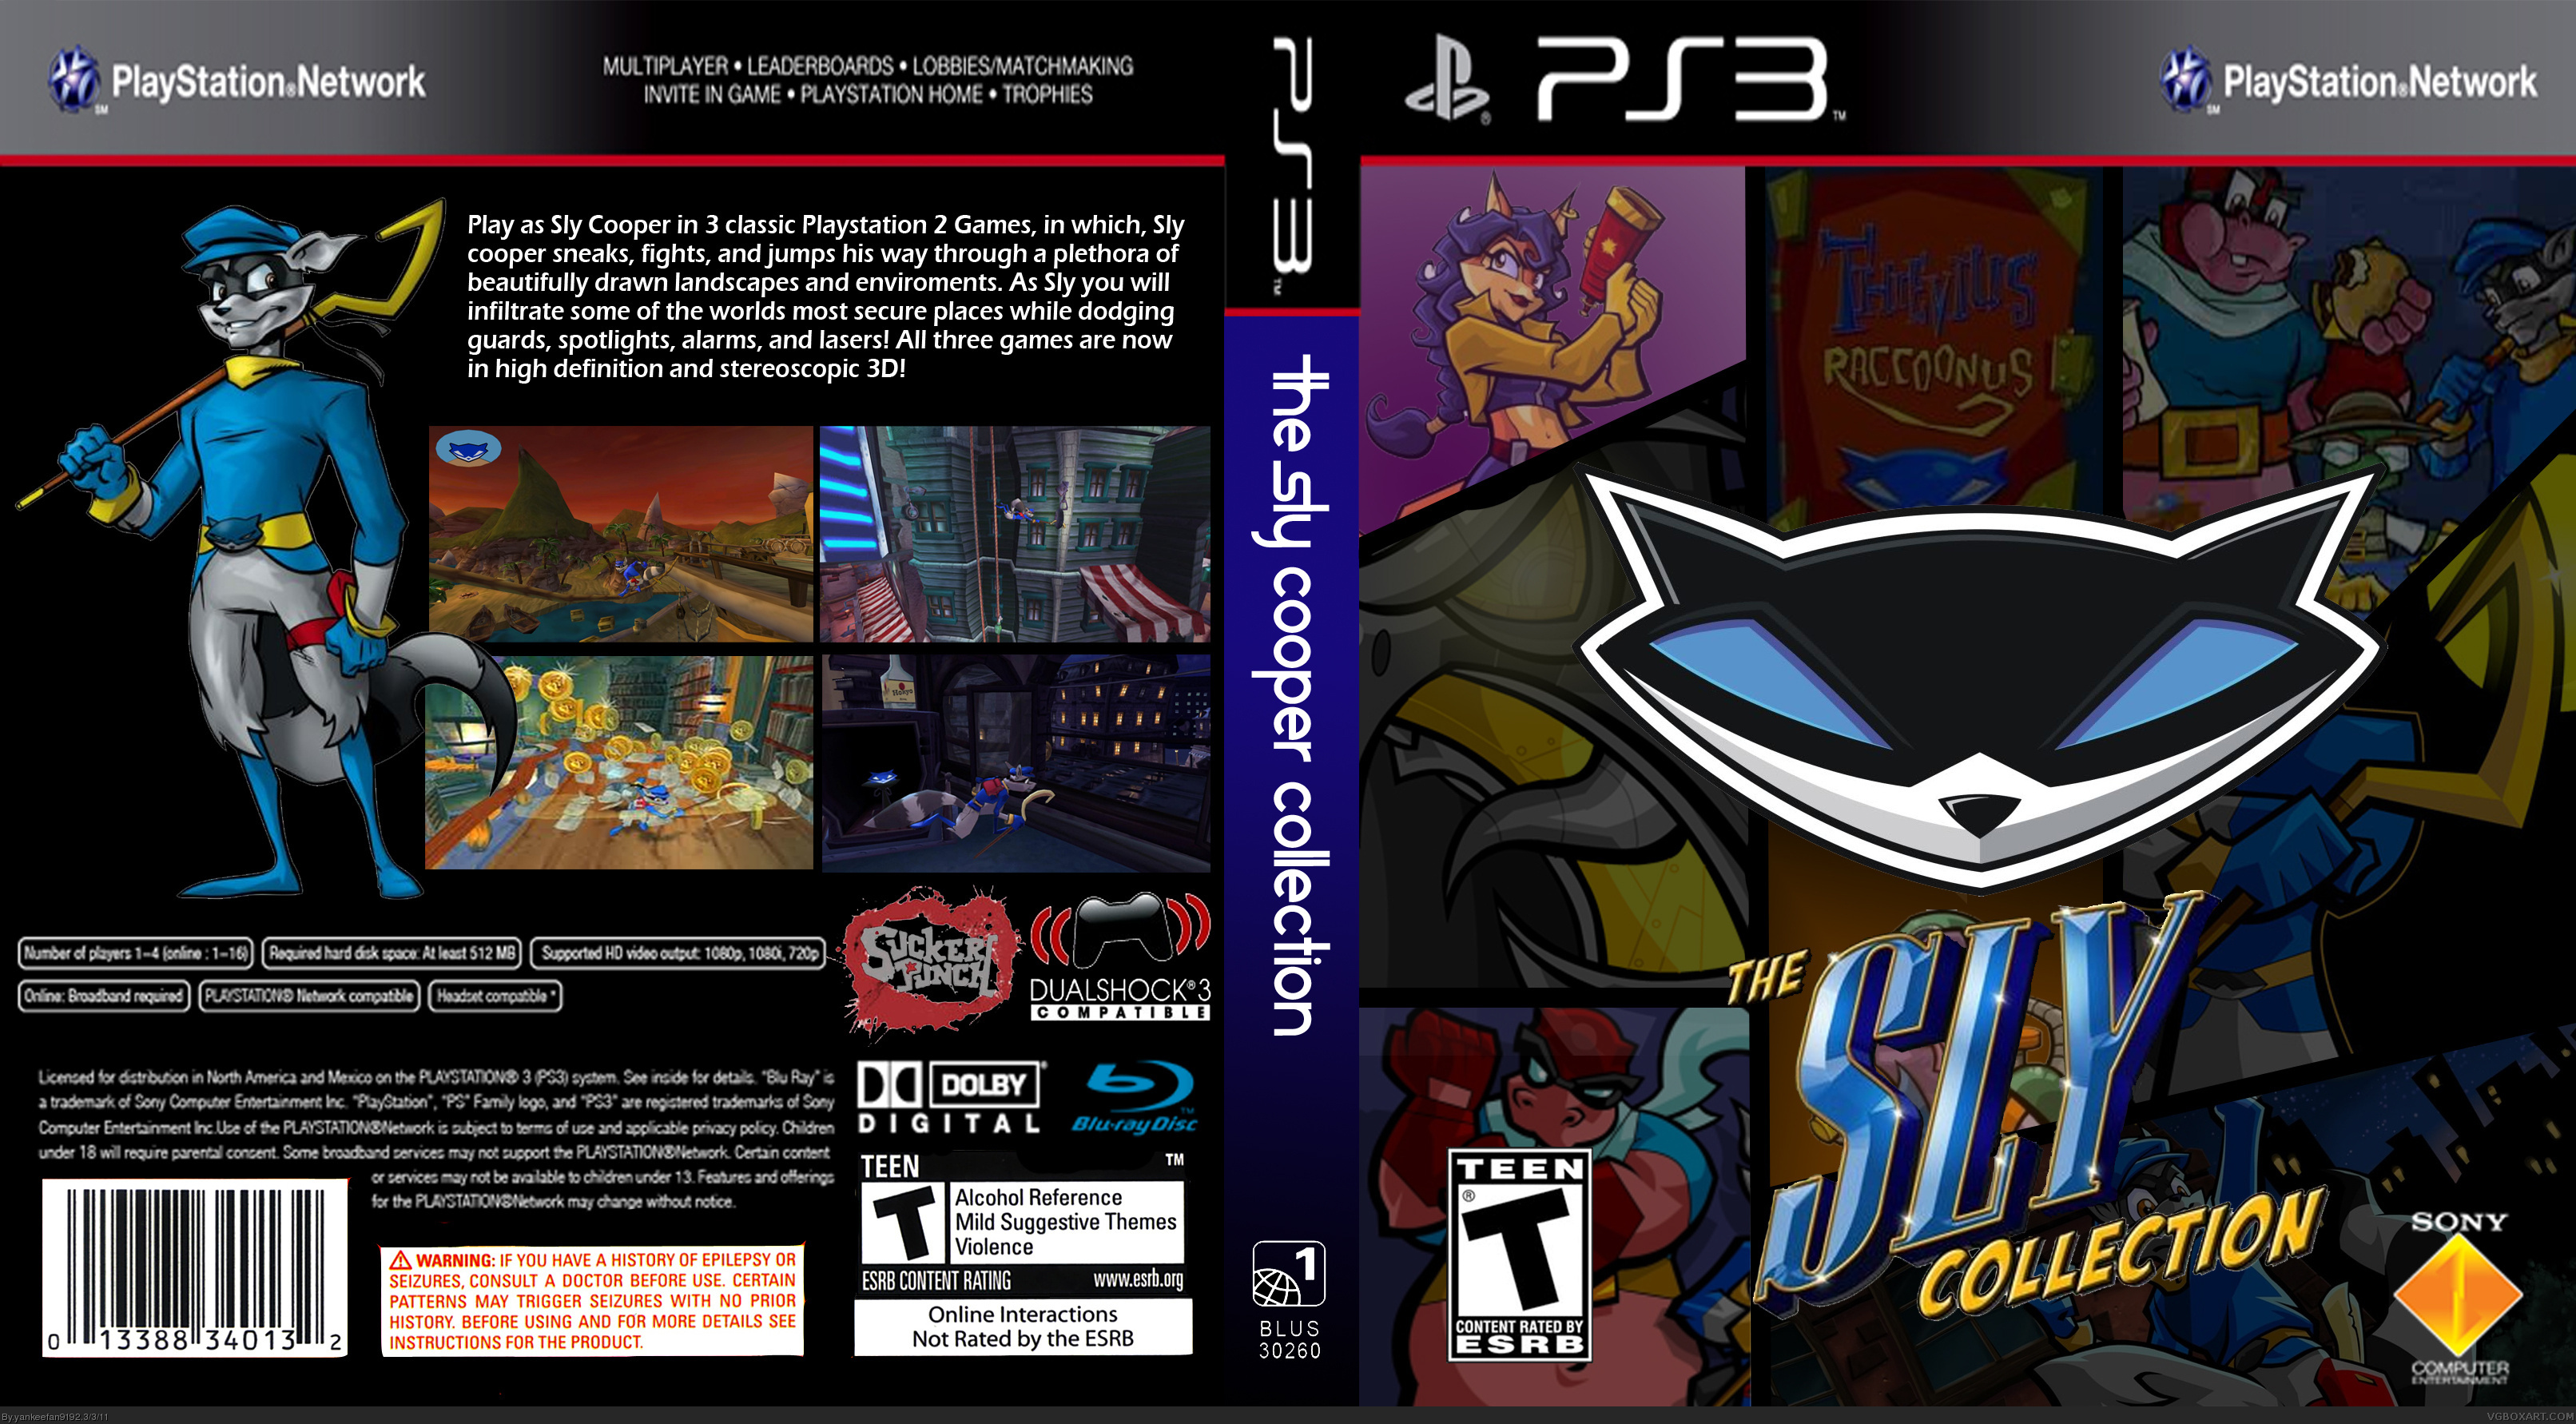 The Sly Cooper Collection box cover